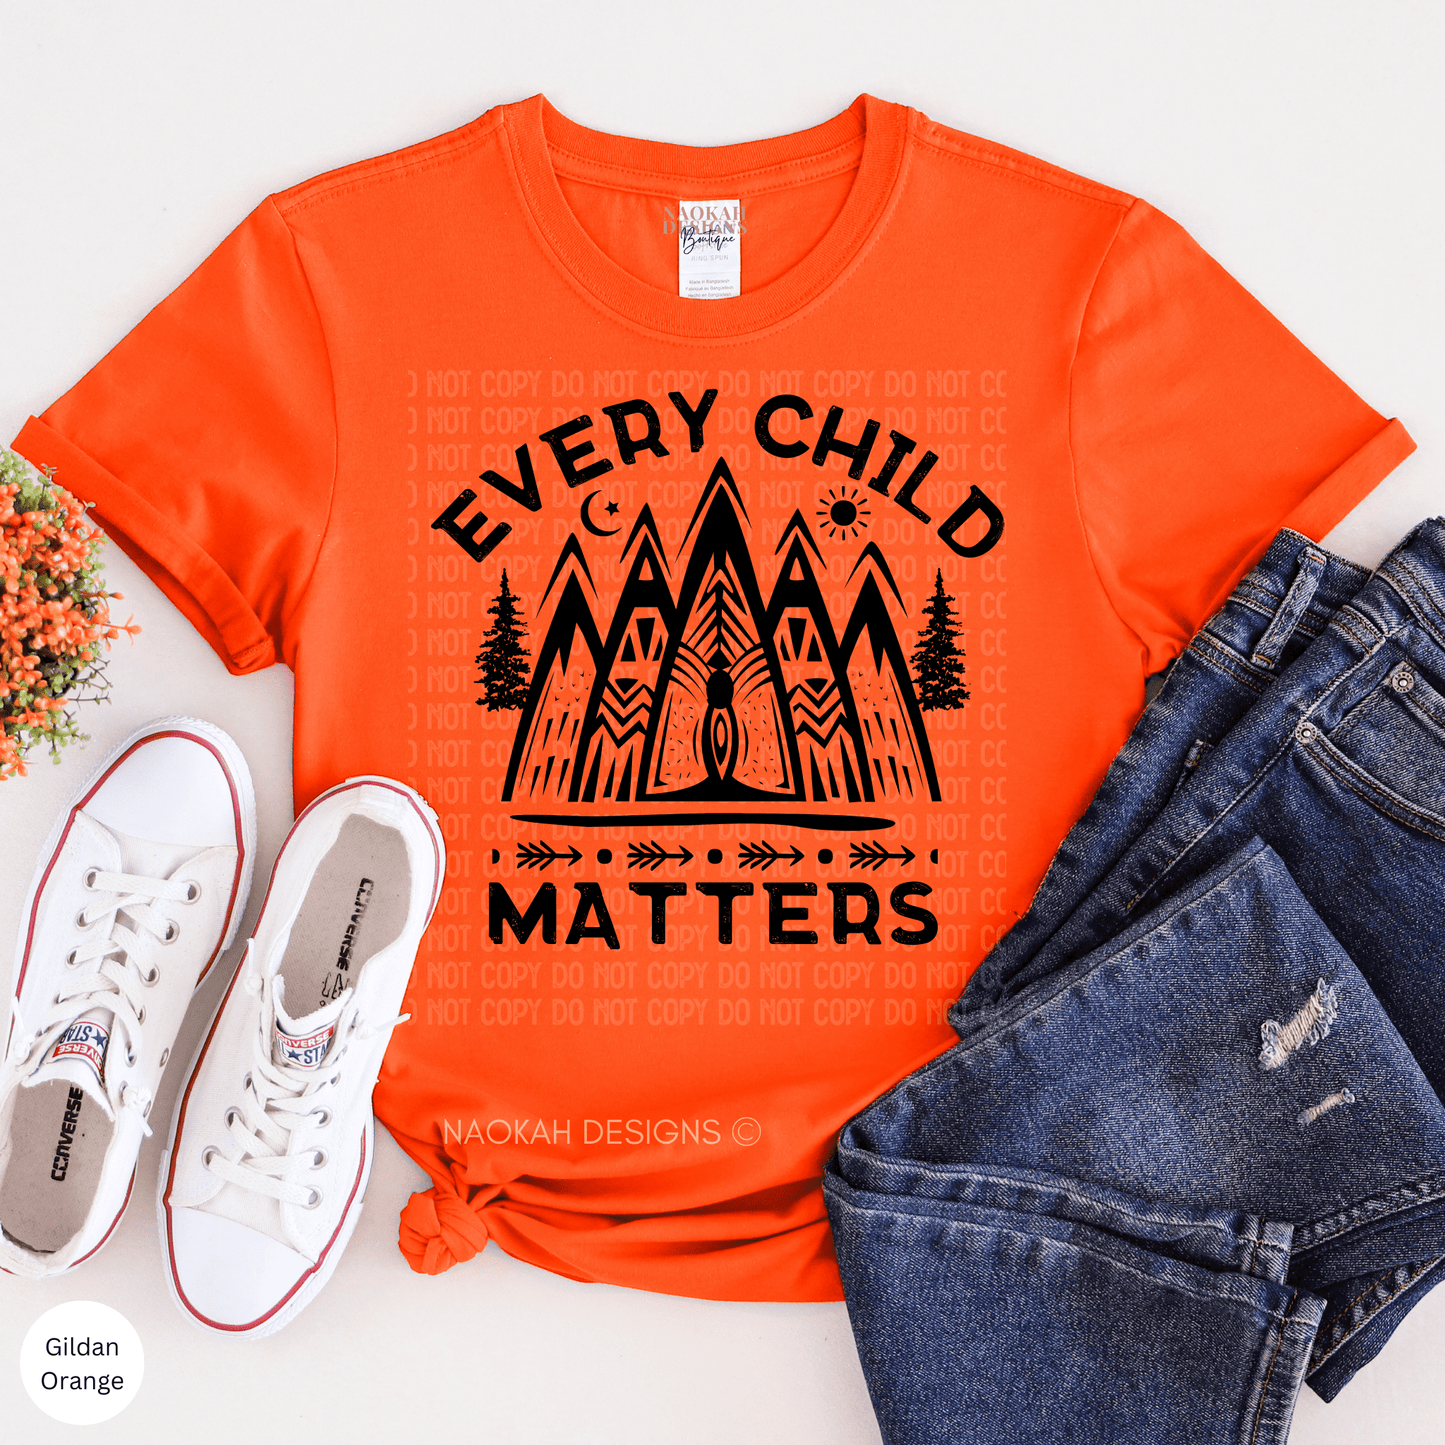 every child matters shirt portion donated, orange shirt day shirt, indigenous owned shop, orange shirt, truth and reconciliation, wanderlust